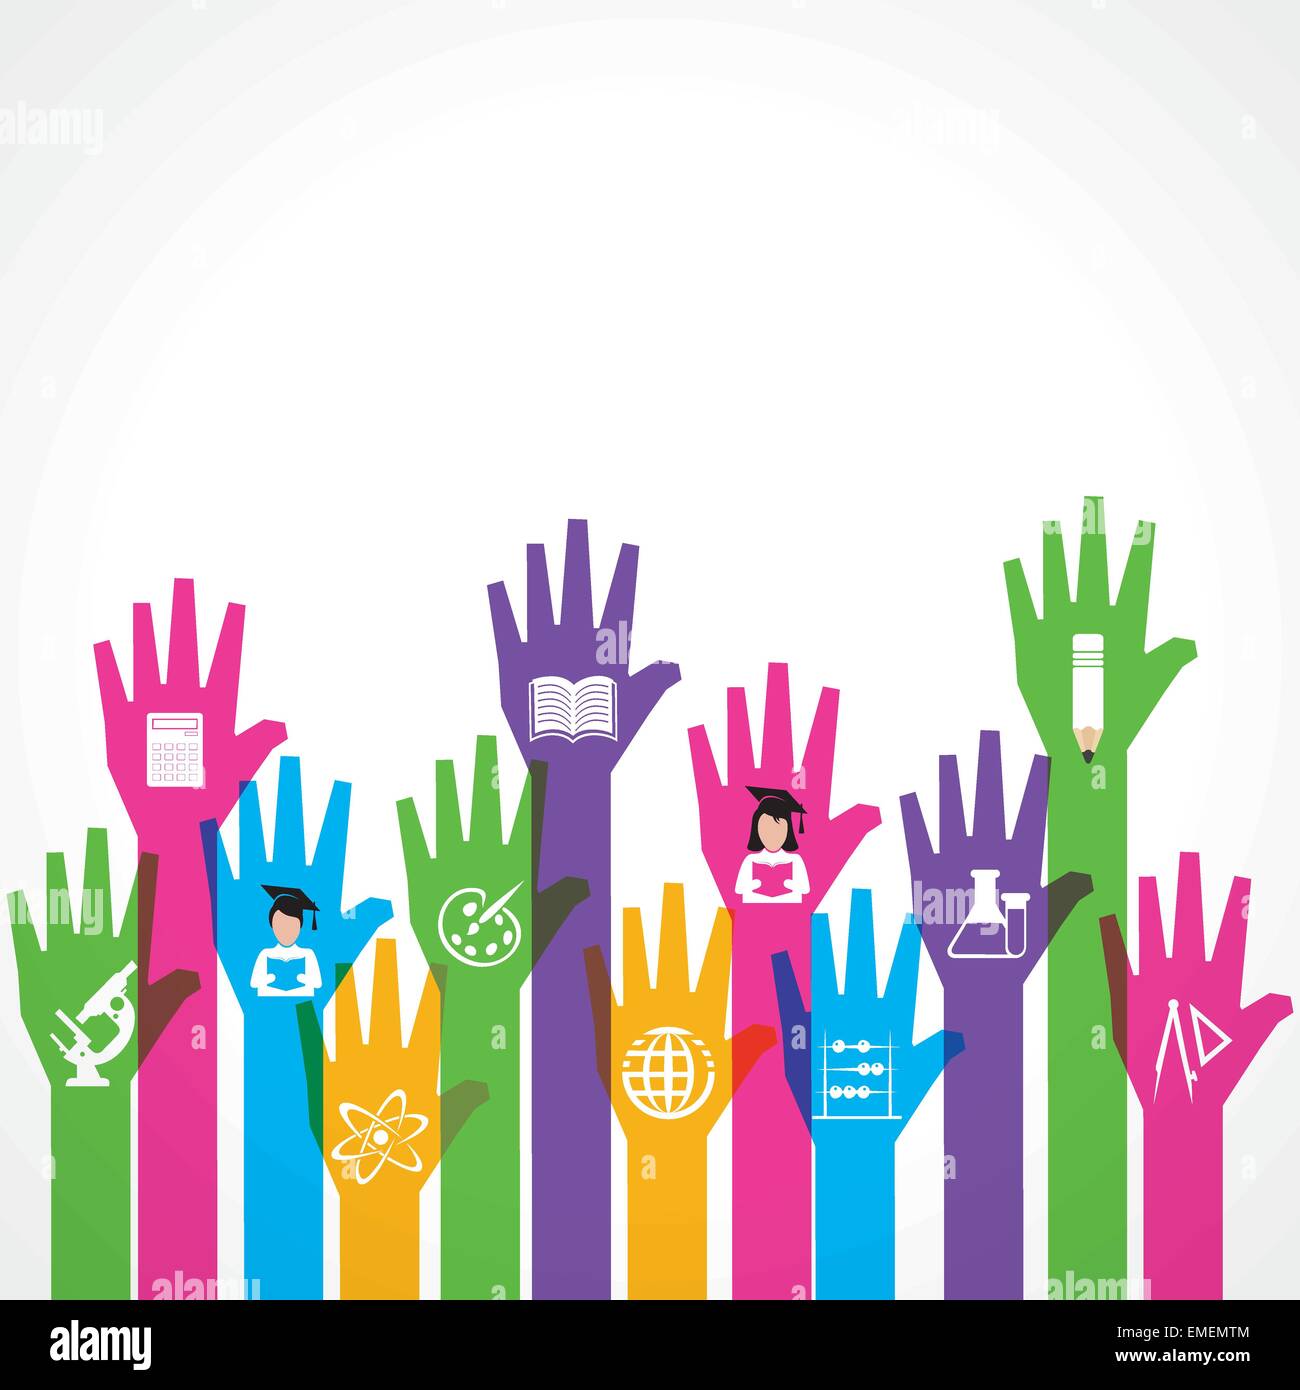 Education icons on up hand stock vector Stock Vector